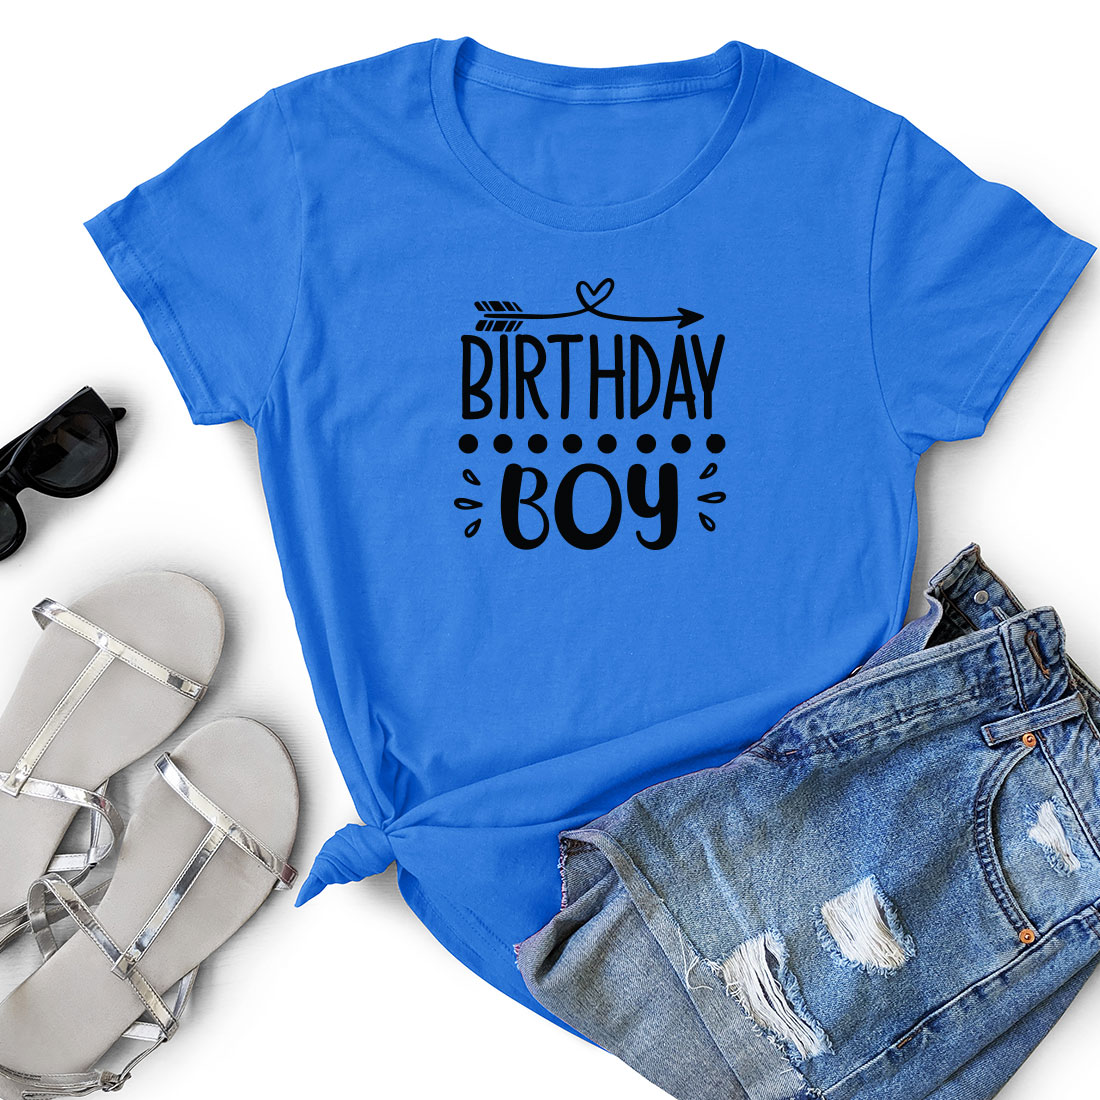 Blue shirt with the words birthday boy on it.